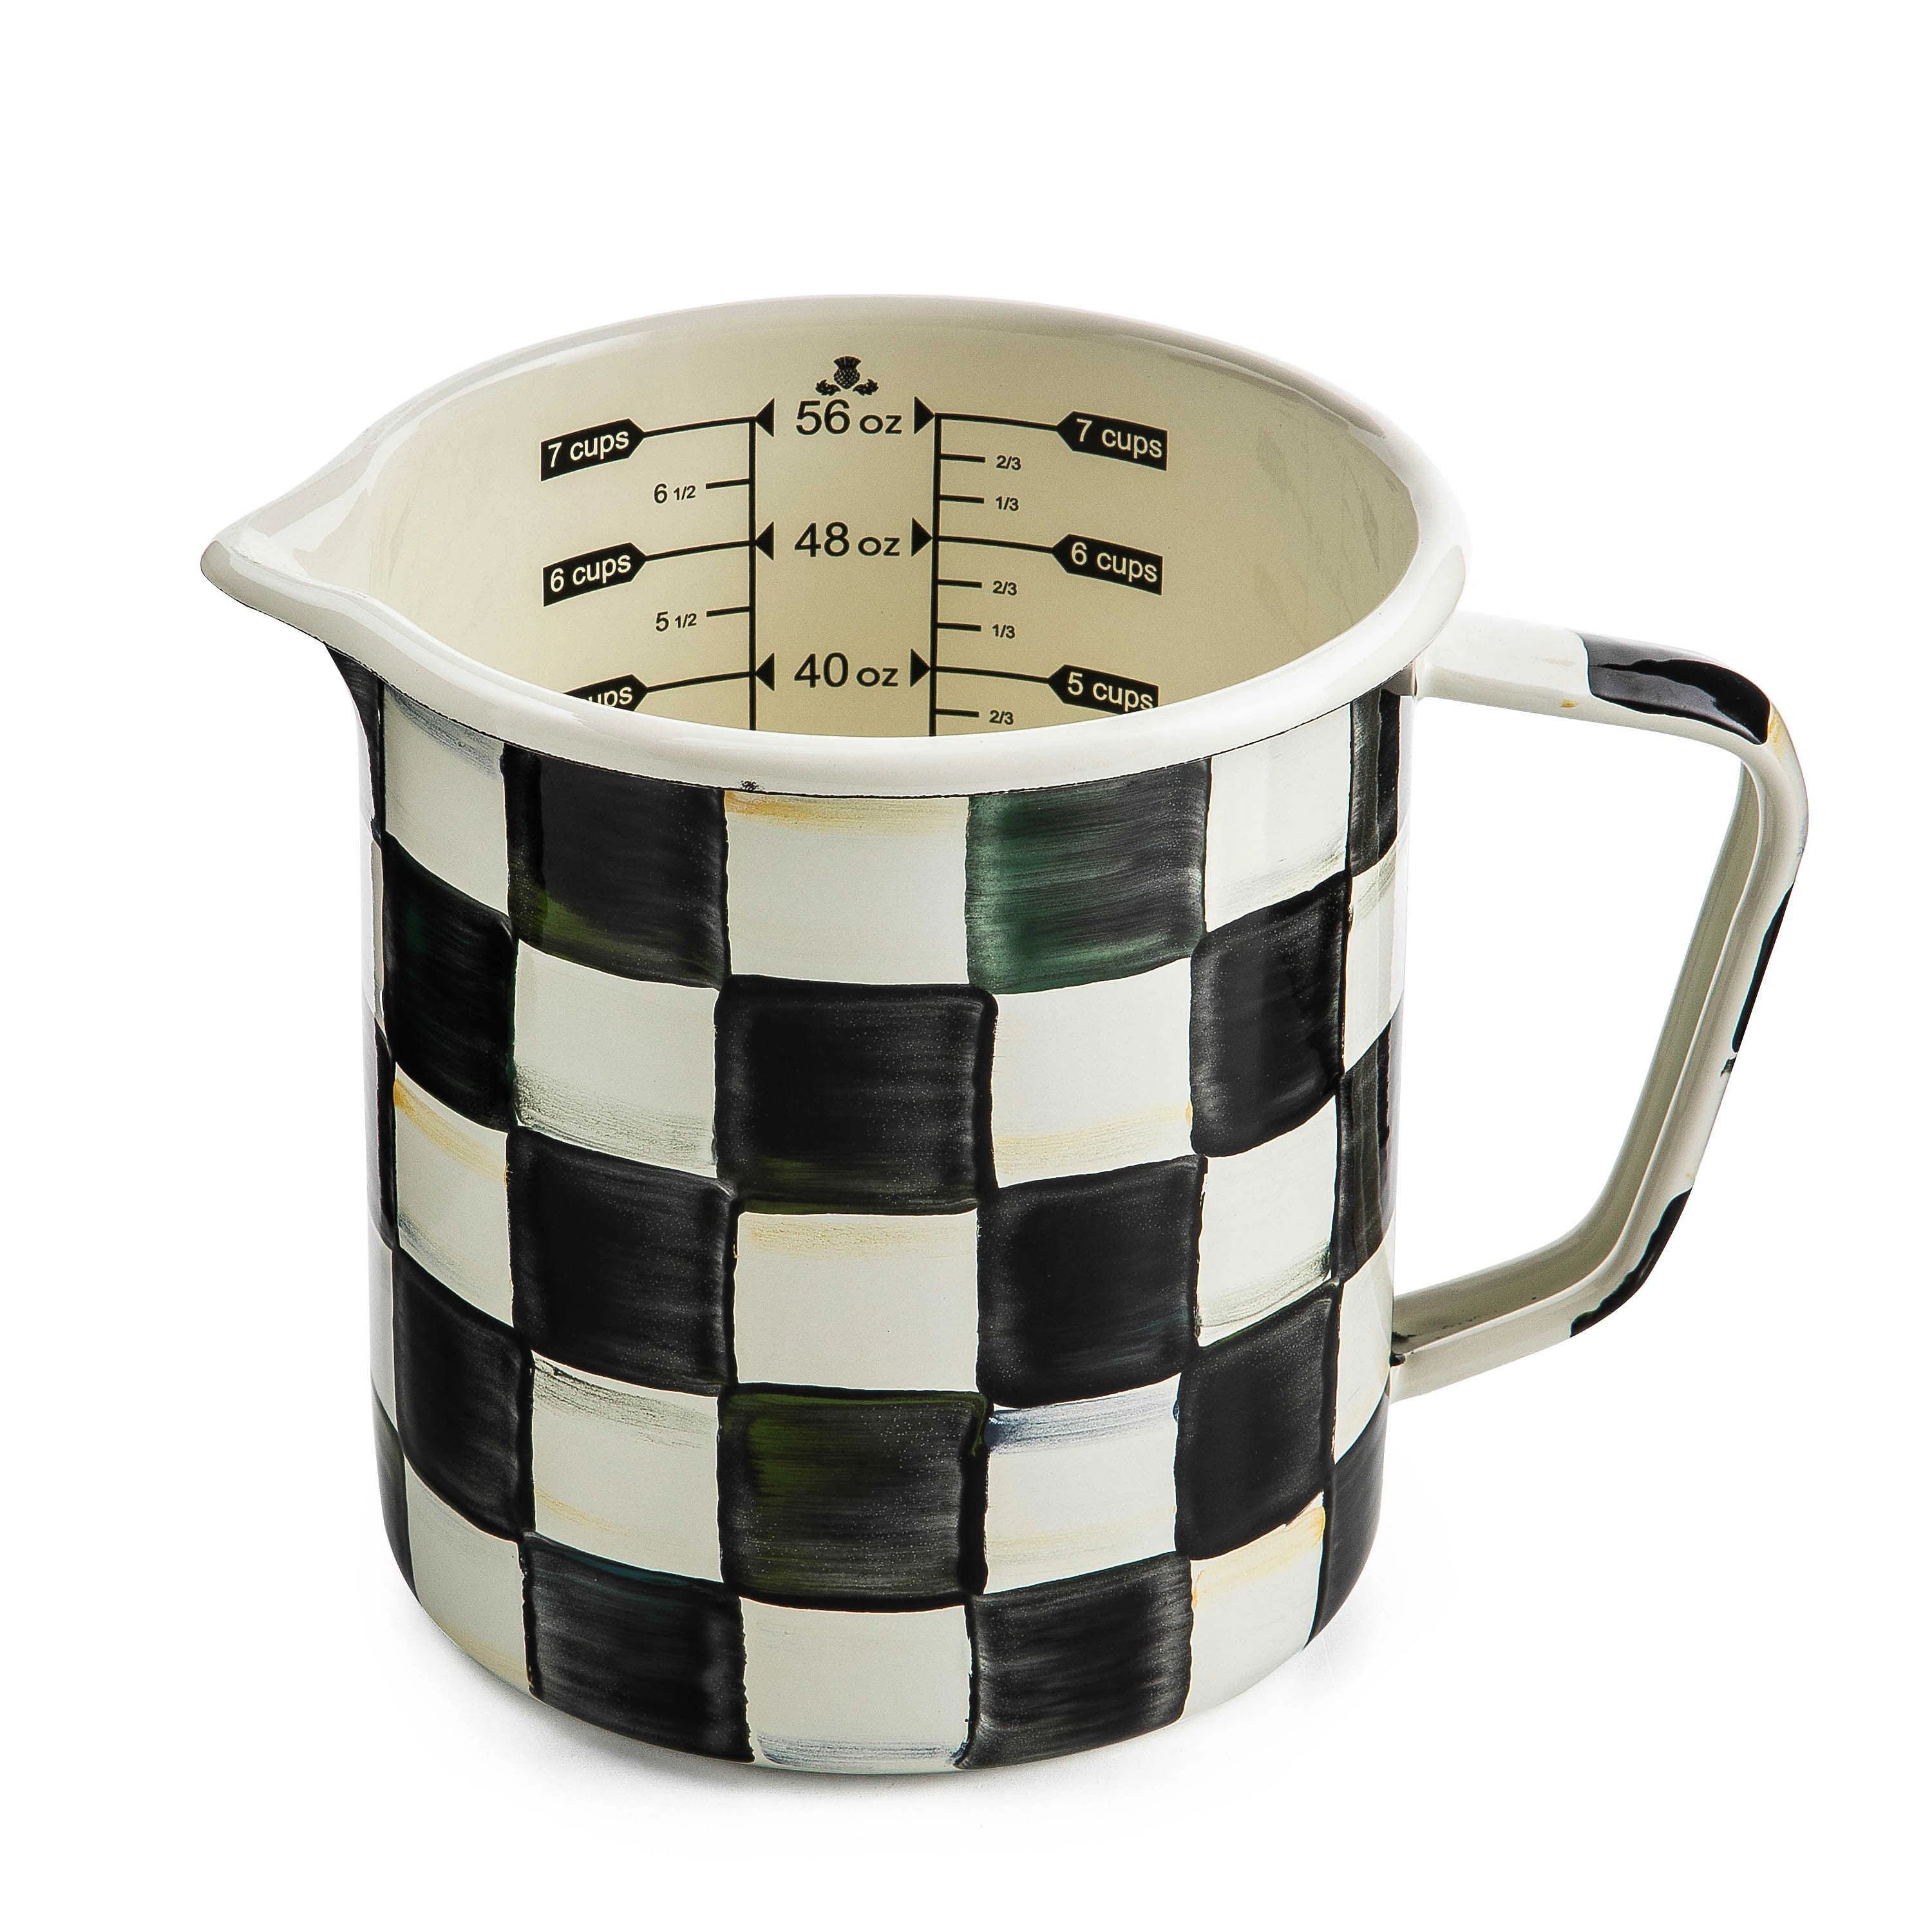 MacKenzie Childs Courtly Check® 7 Cup Measuring Cup | Wayfair | Wayfair North America